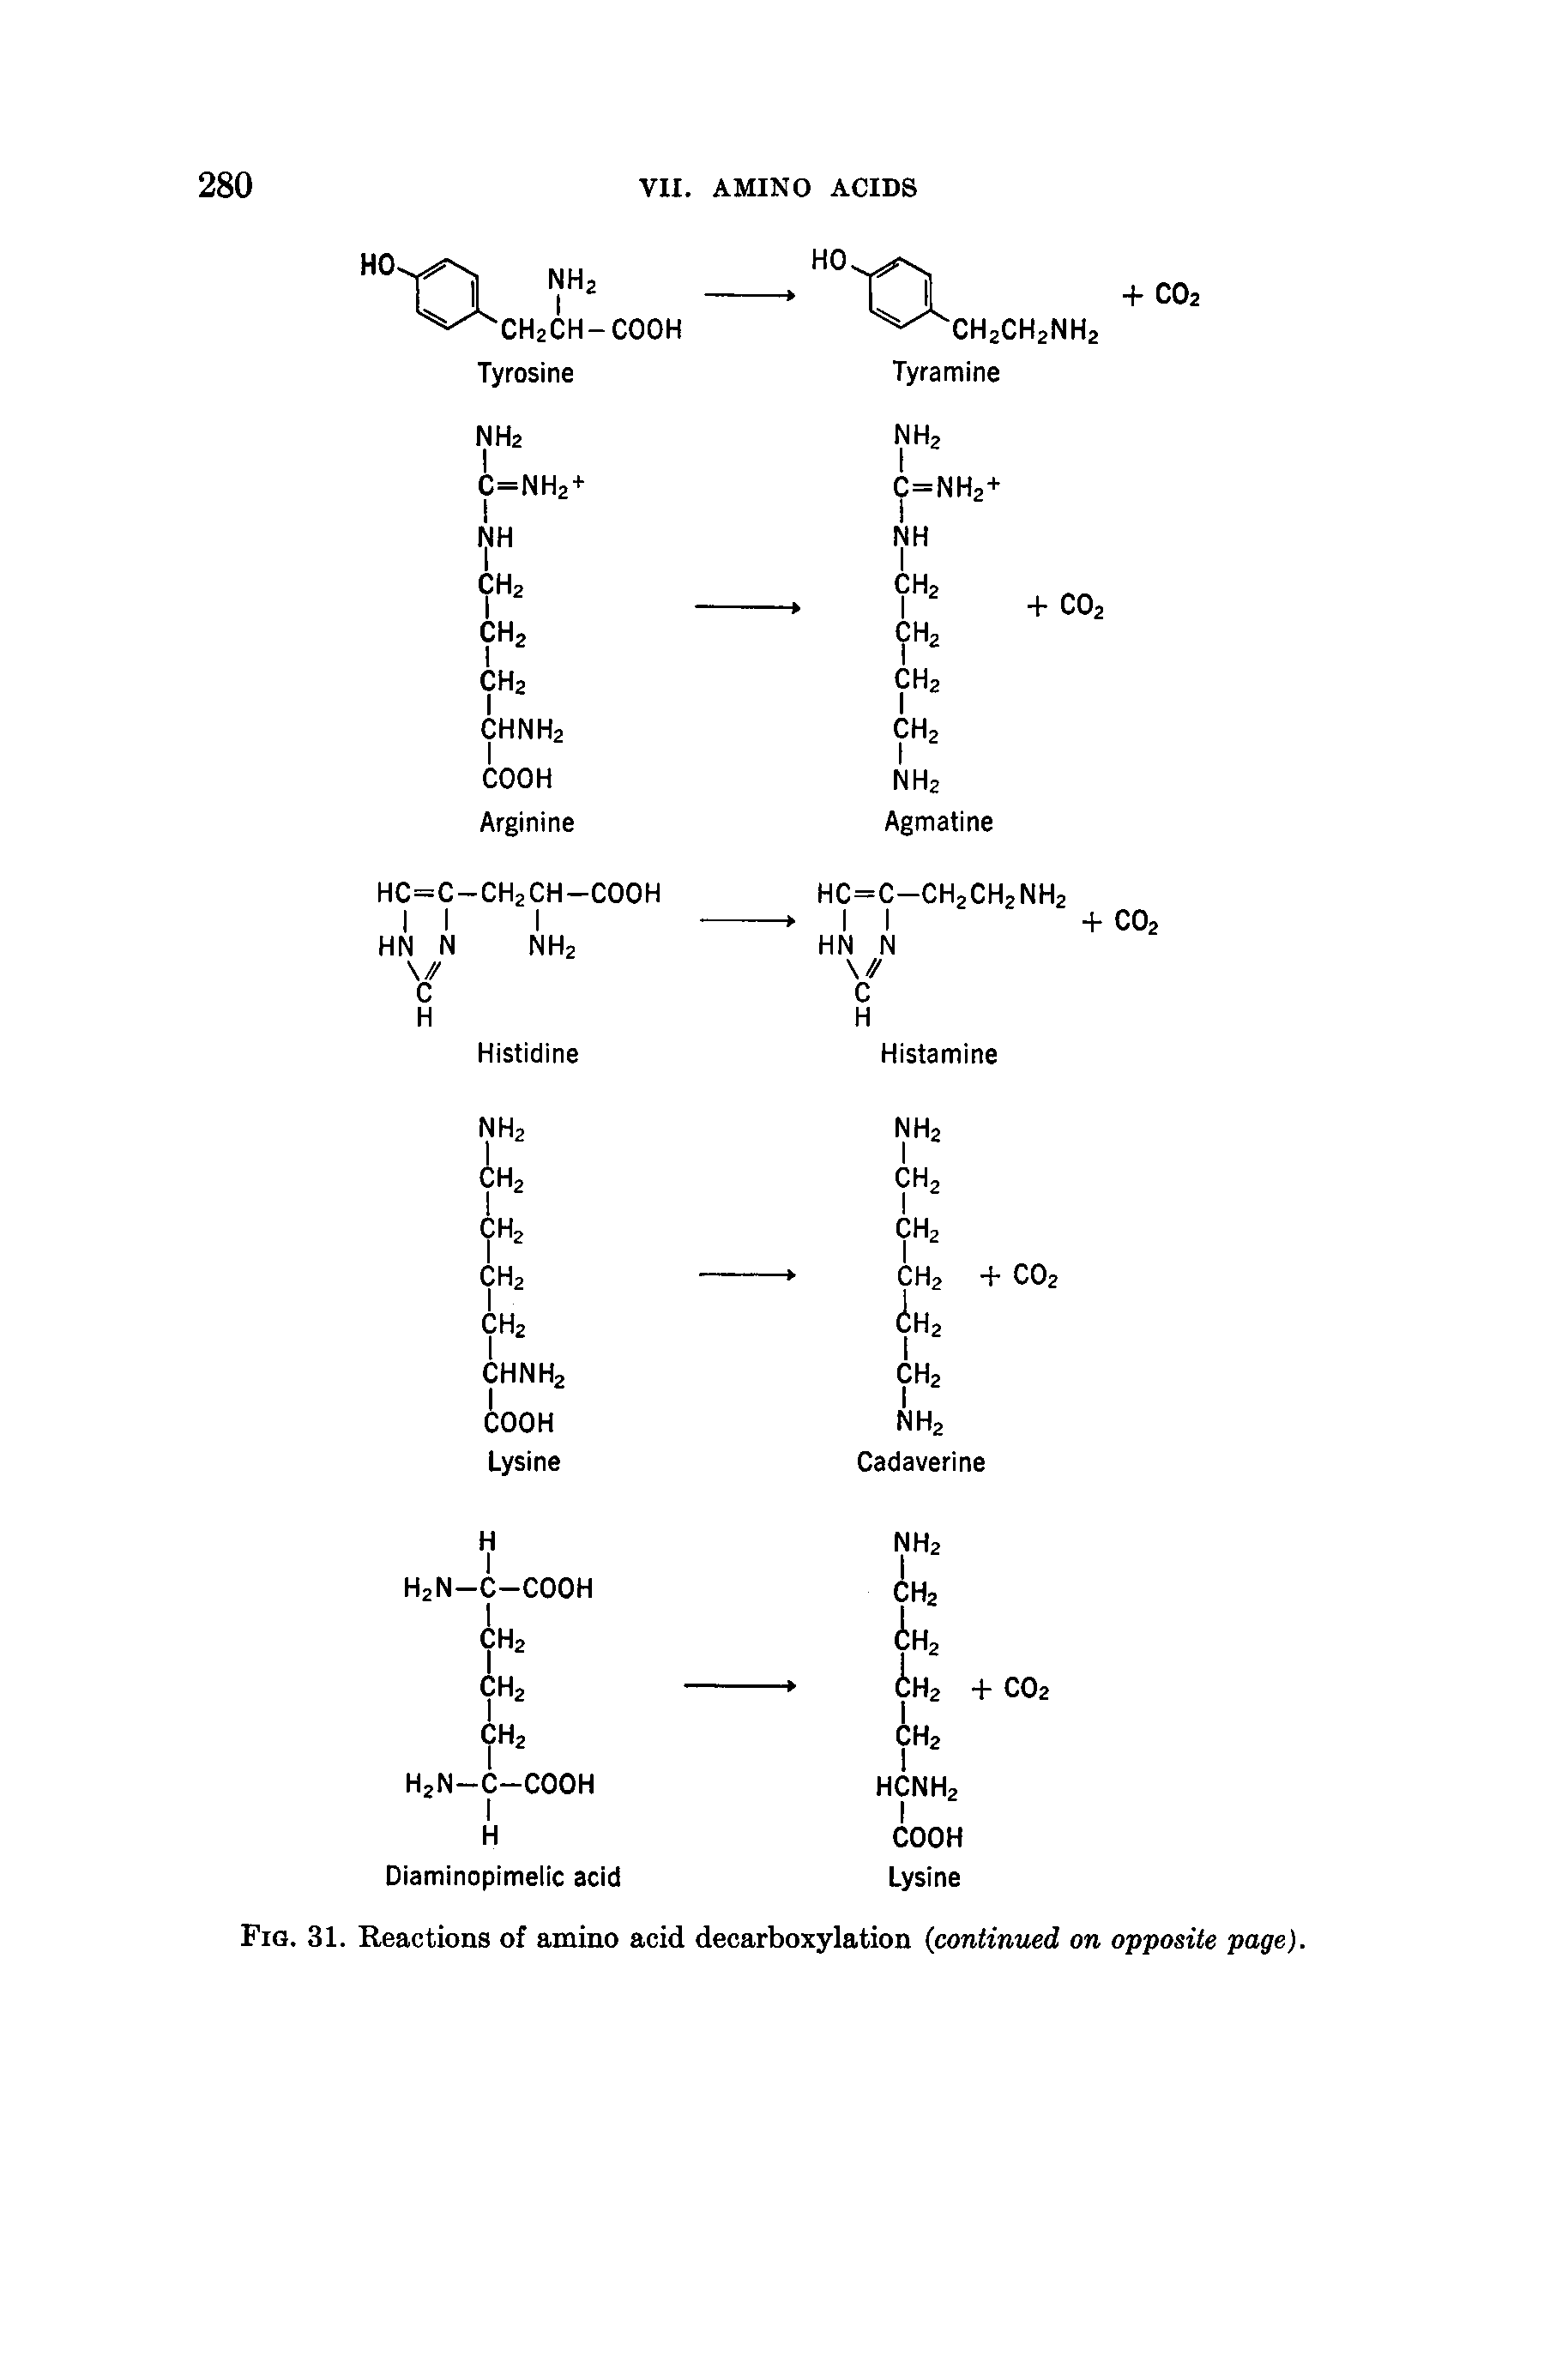 Fig. 31. Reactions of amino acid decarboxylation continued on opposite page).